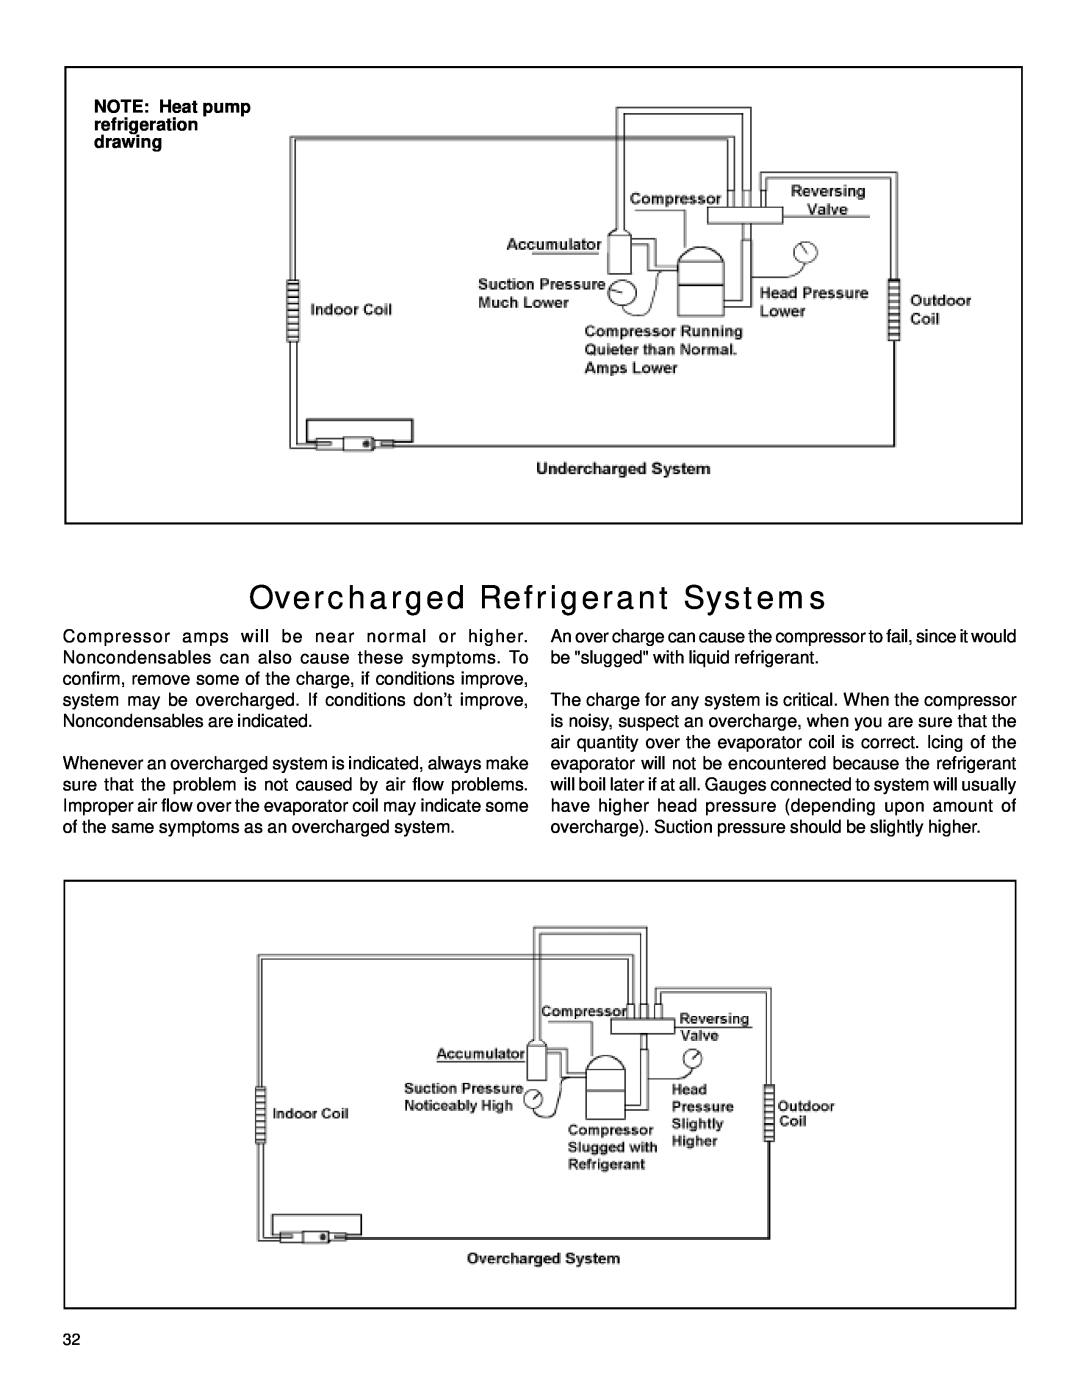 Friedrich 2003 service manual Overcharged Refrigerant Systems, NOTE Heat pump refrigeration drawing 